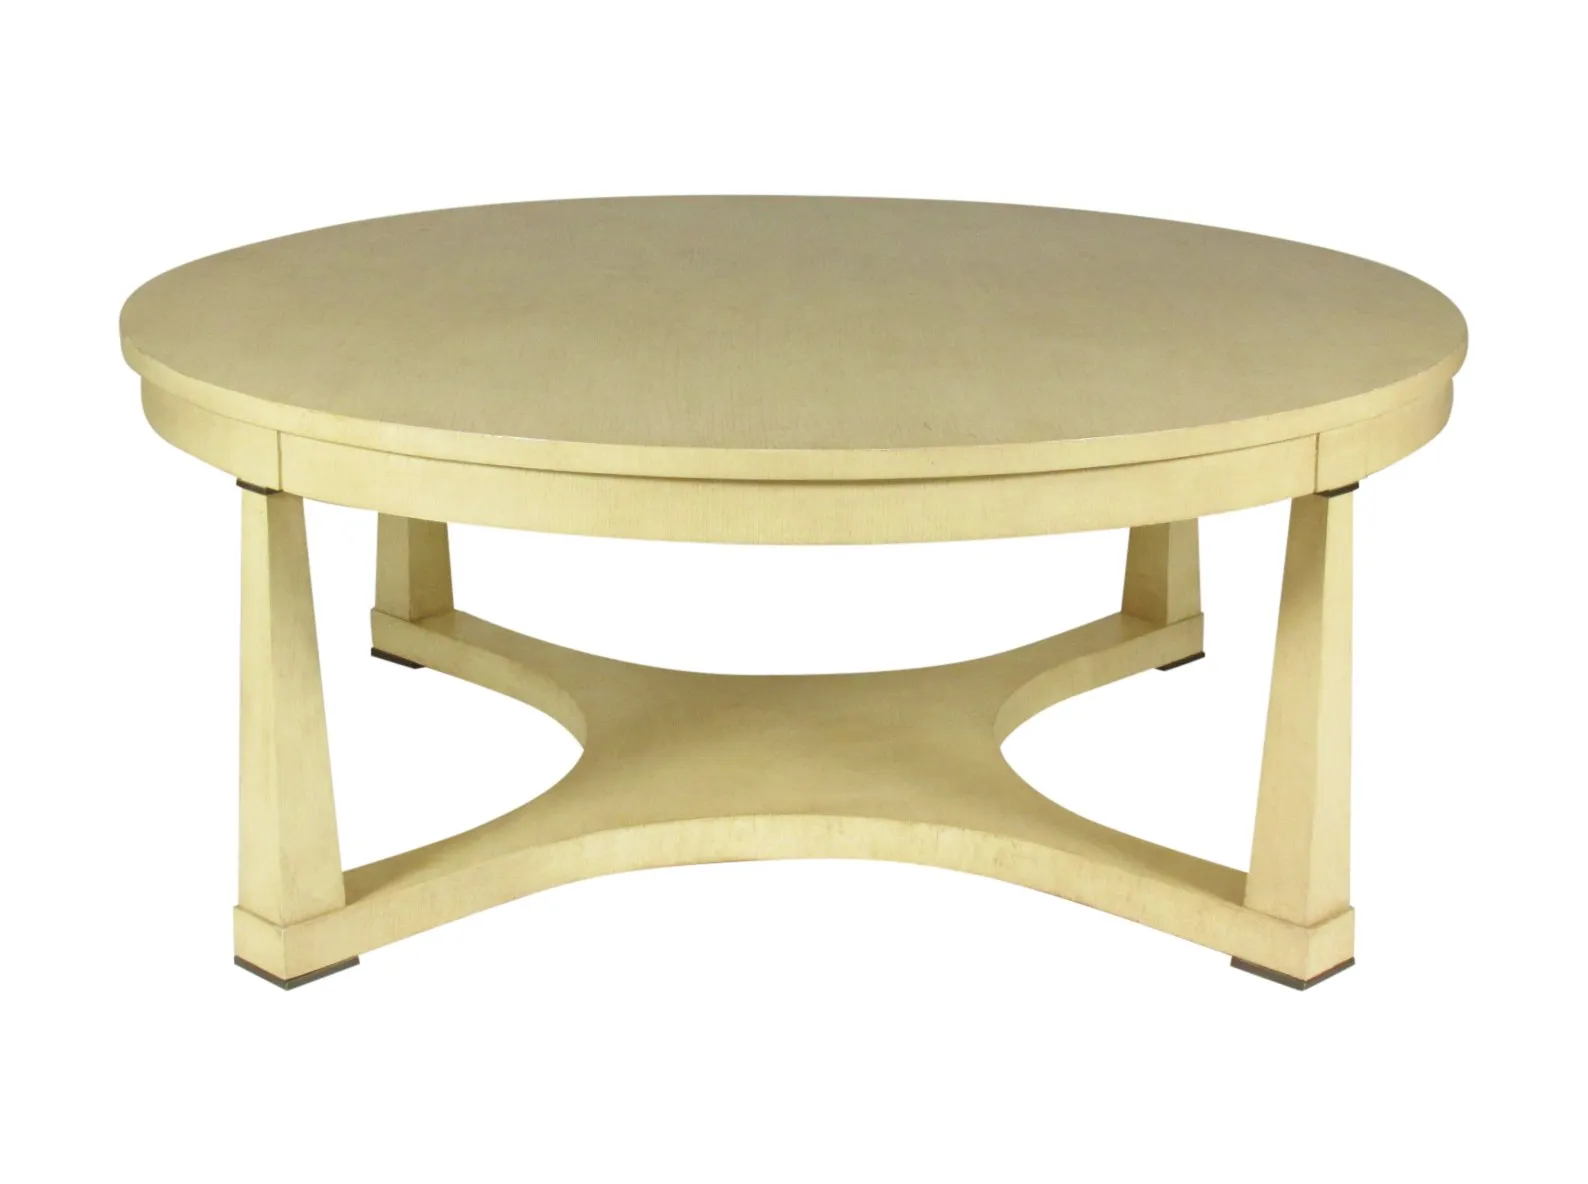 Cotemporary Coffee Table by Hickory - The Barn at 17 Antiques - ivory